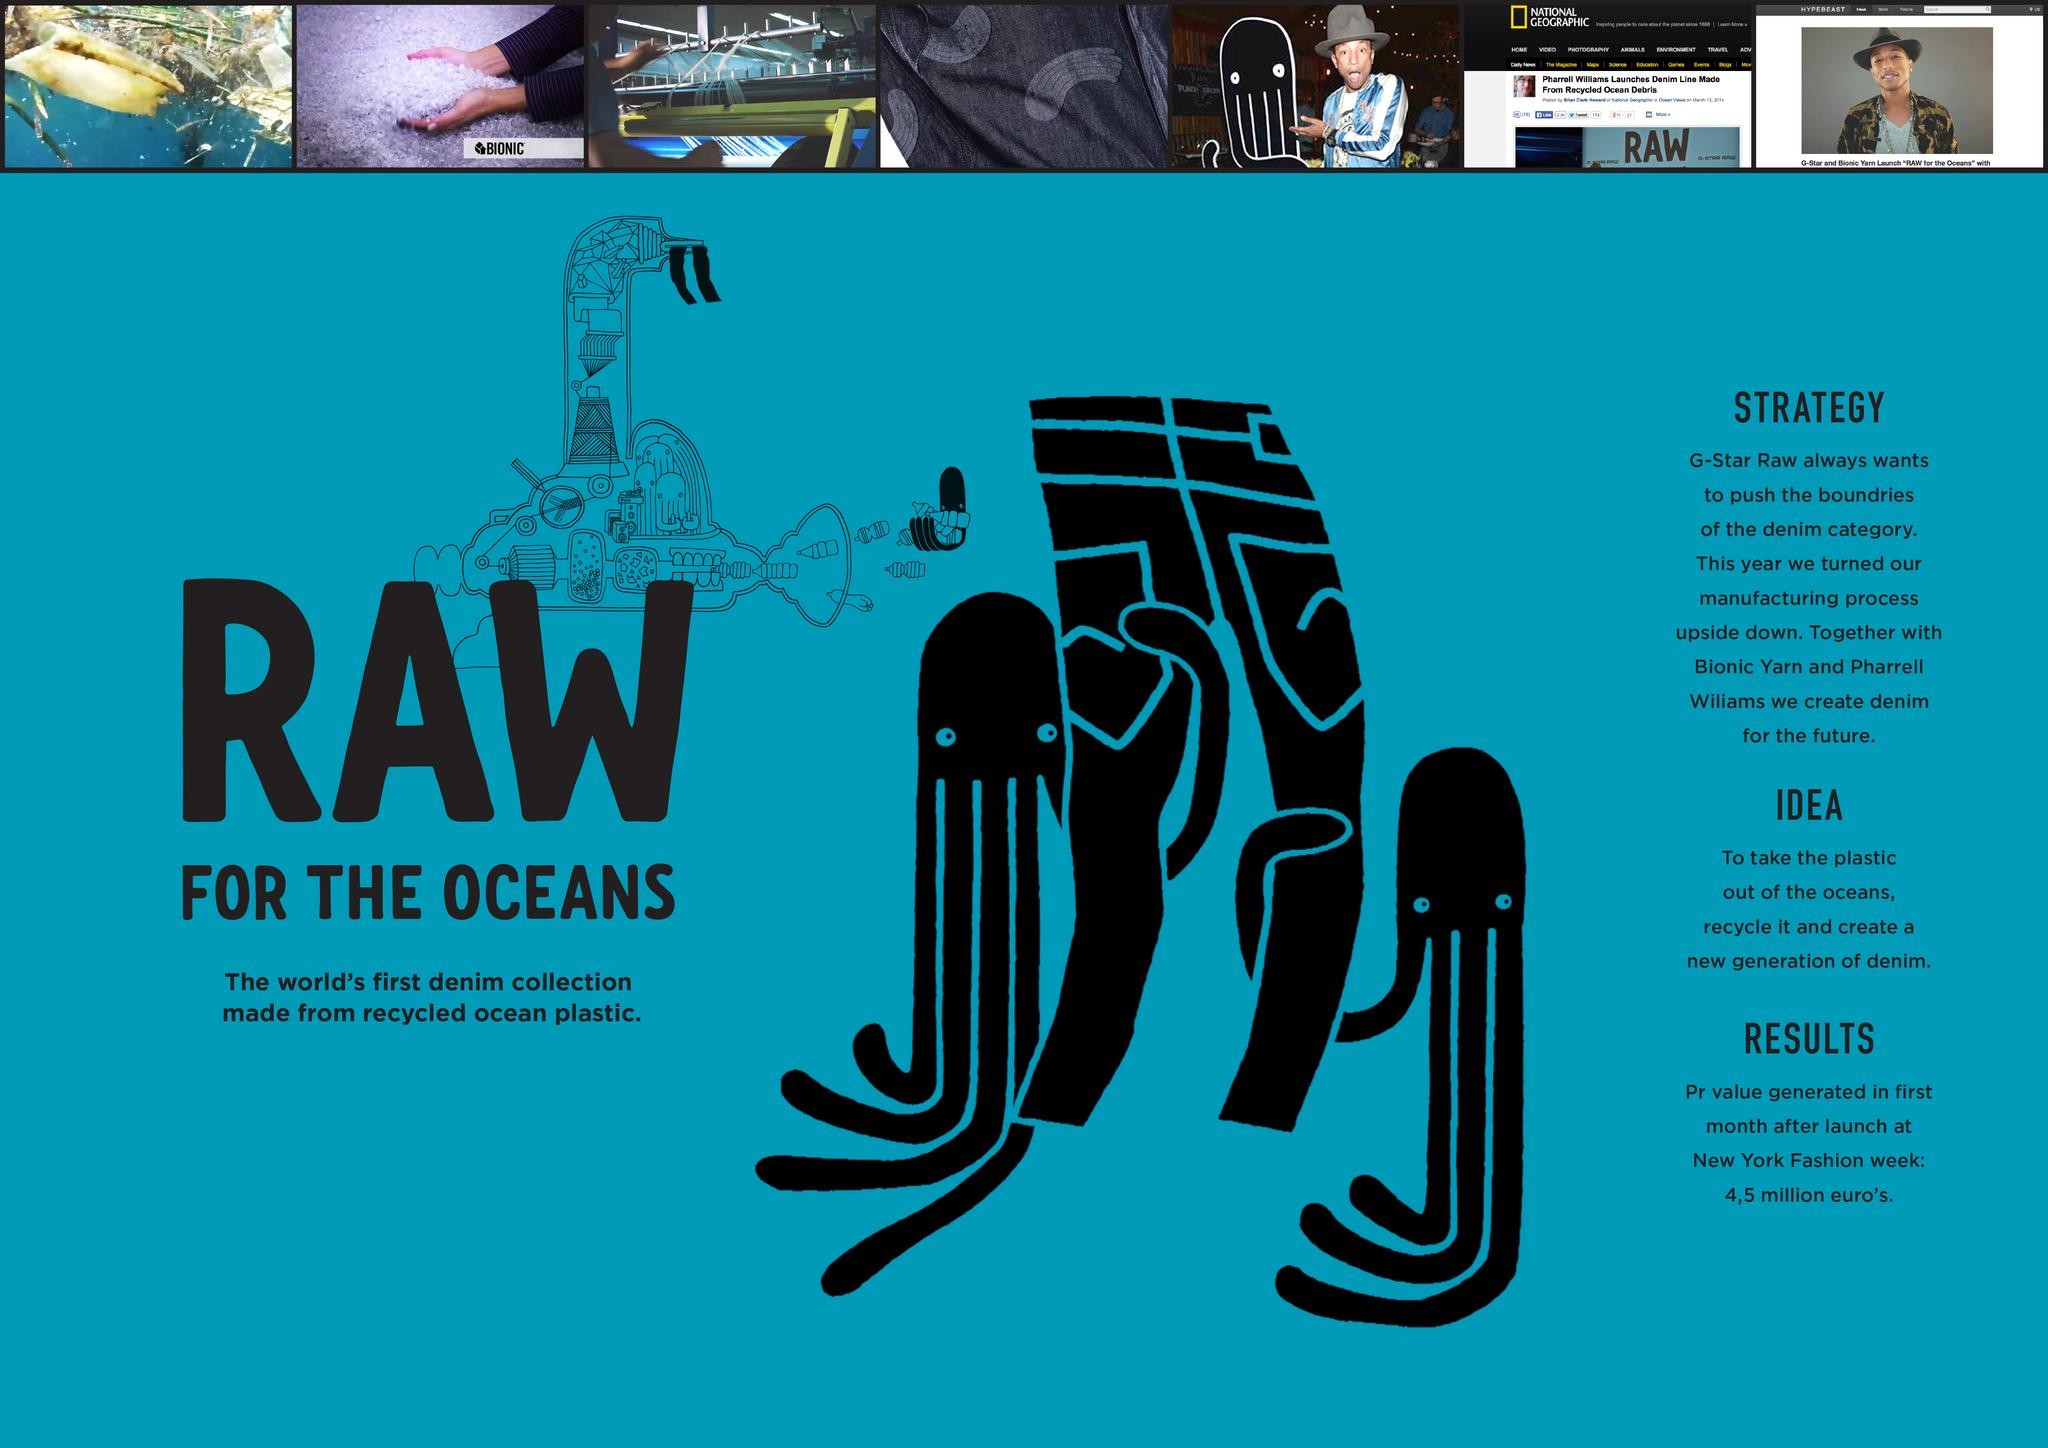 RAW FOR THE OCEANS